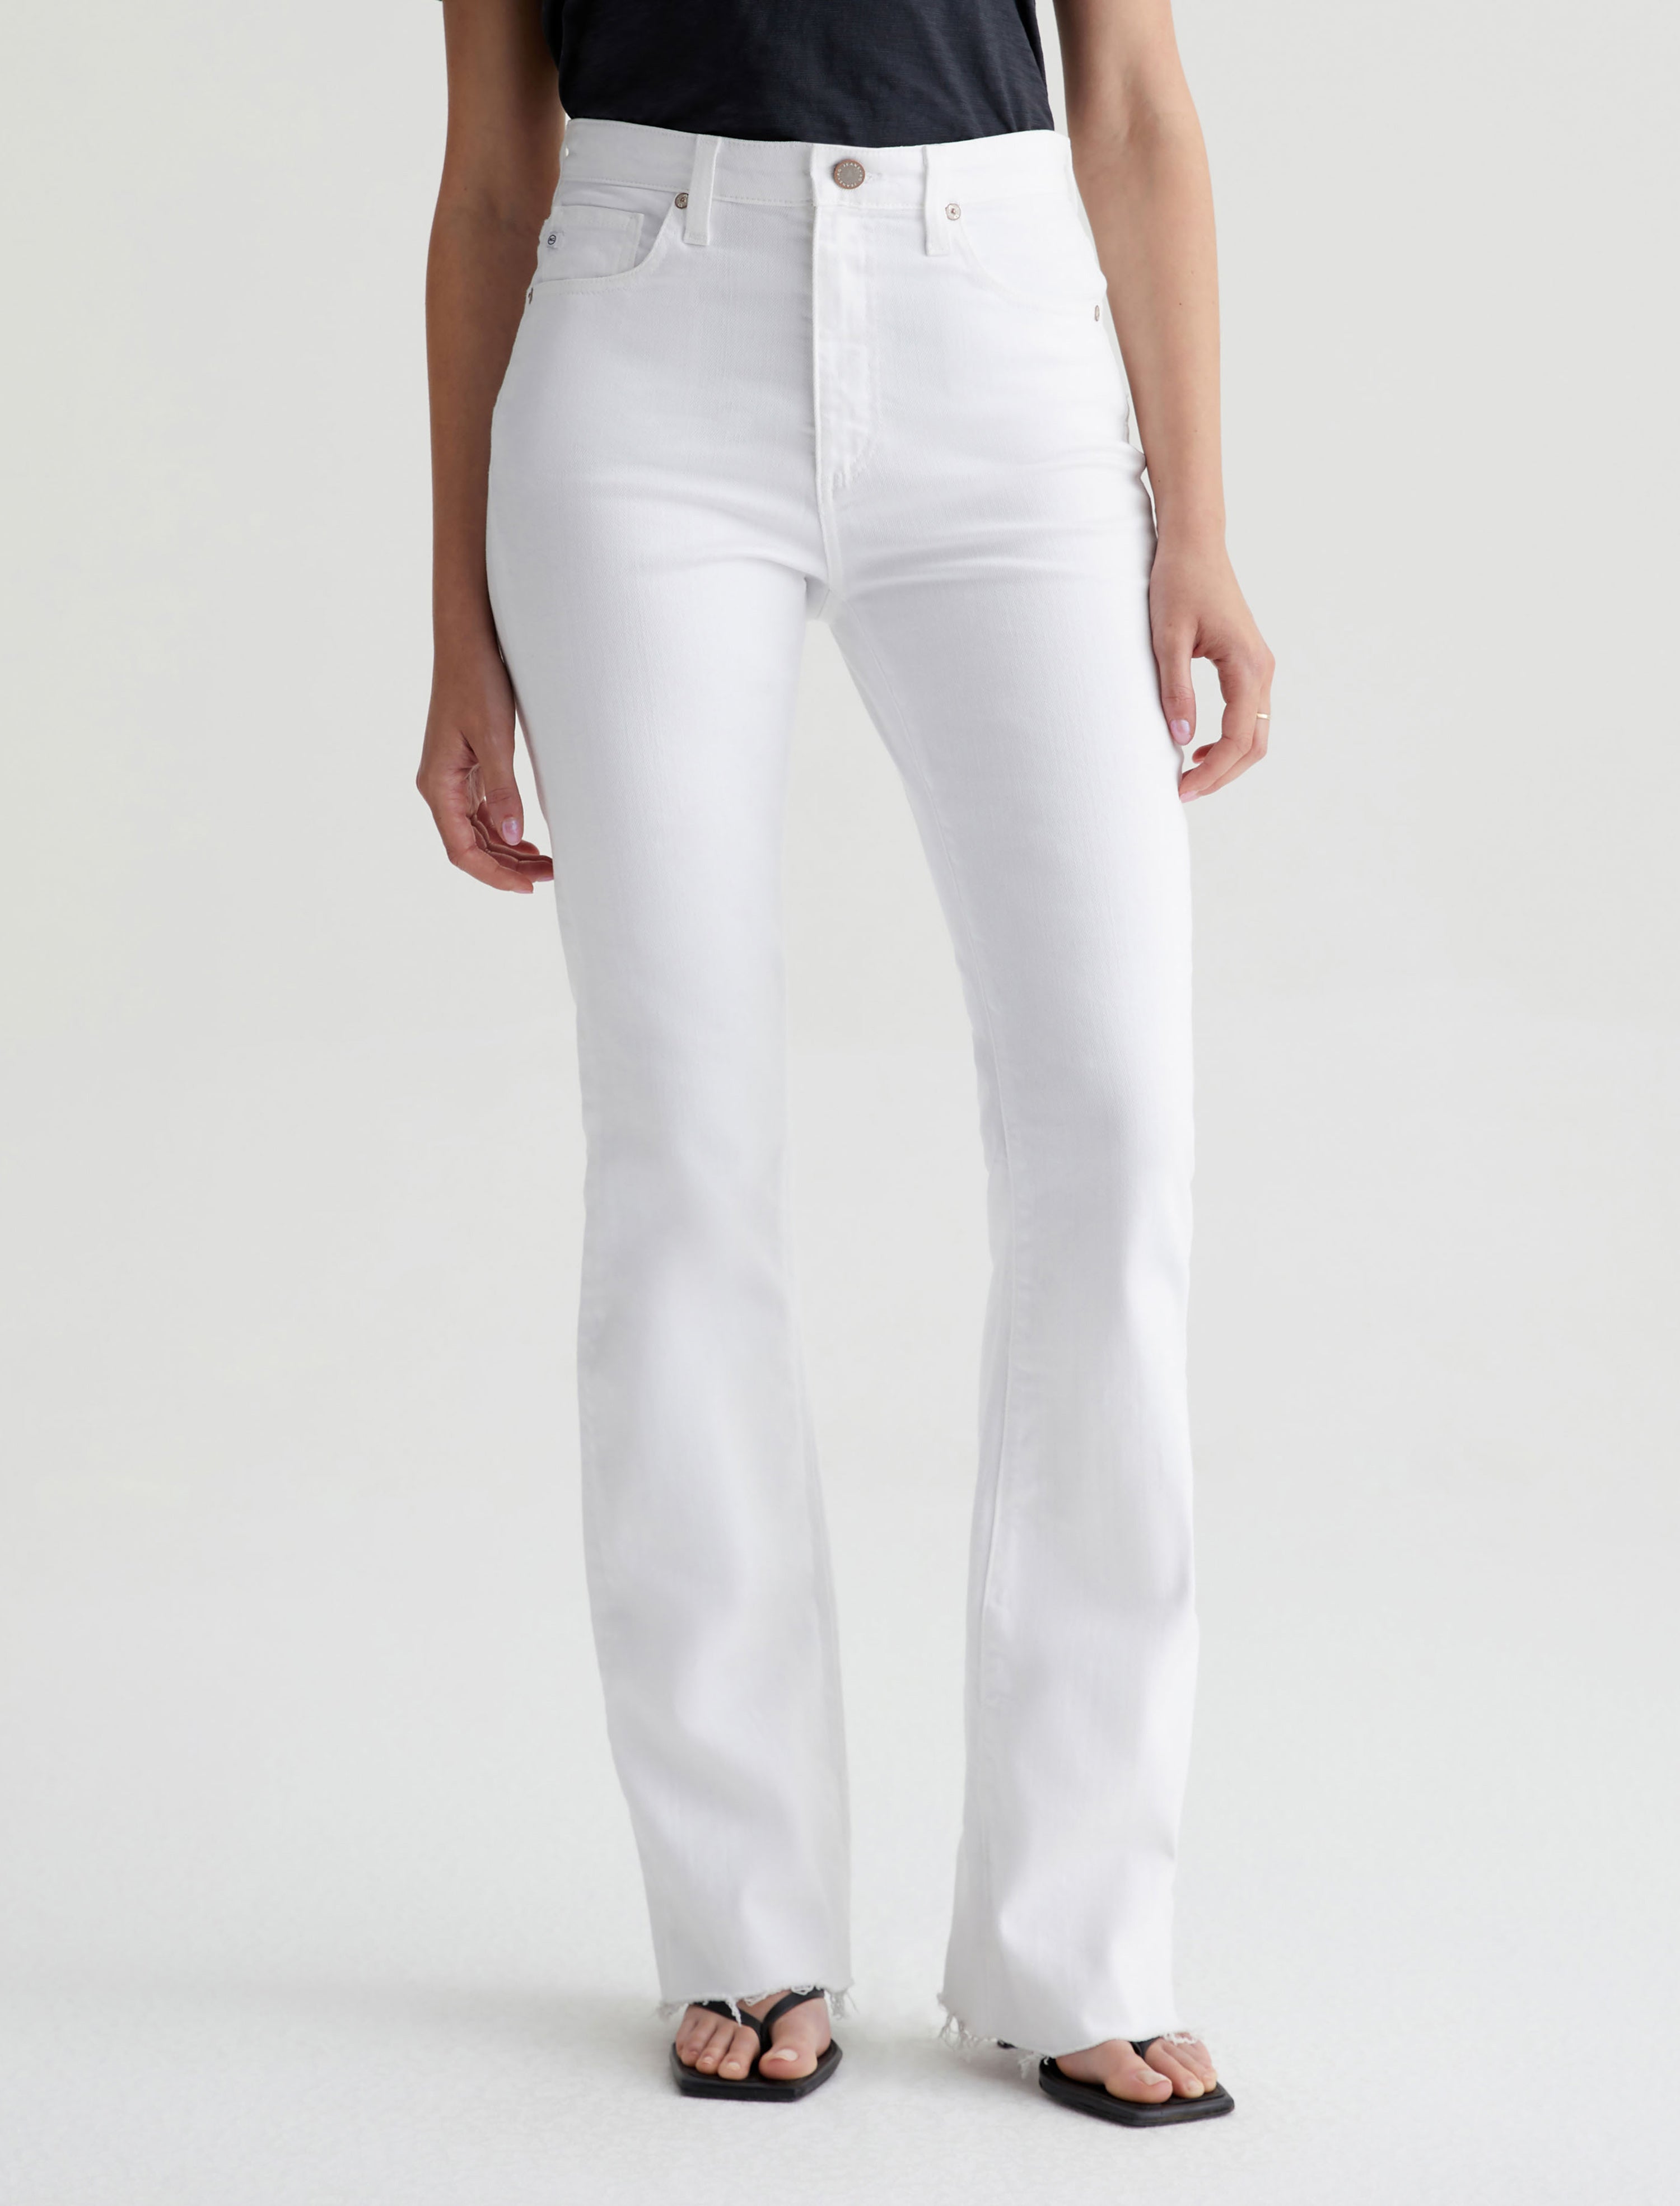 Albescent White Casual High-Waisted Parallel Cargo Trouser Pants for Women  -699 at Rs 799.00 | High Waisted Pant | ID: 2852229004648